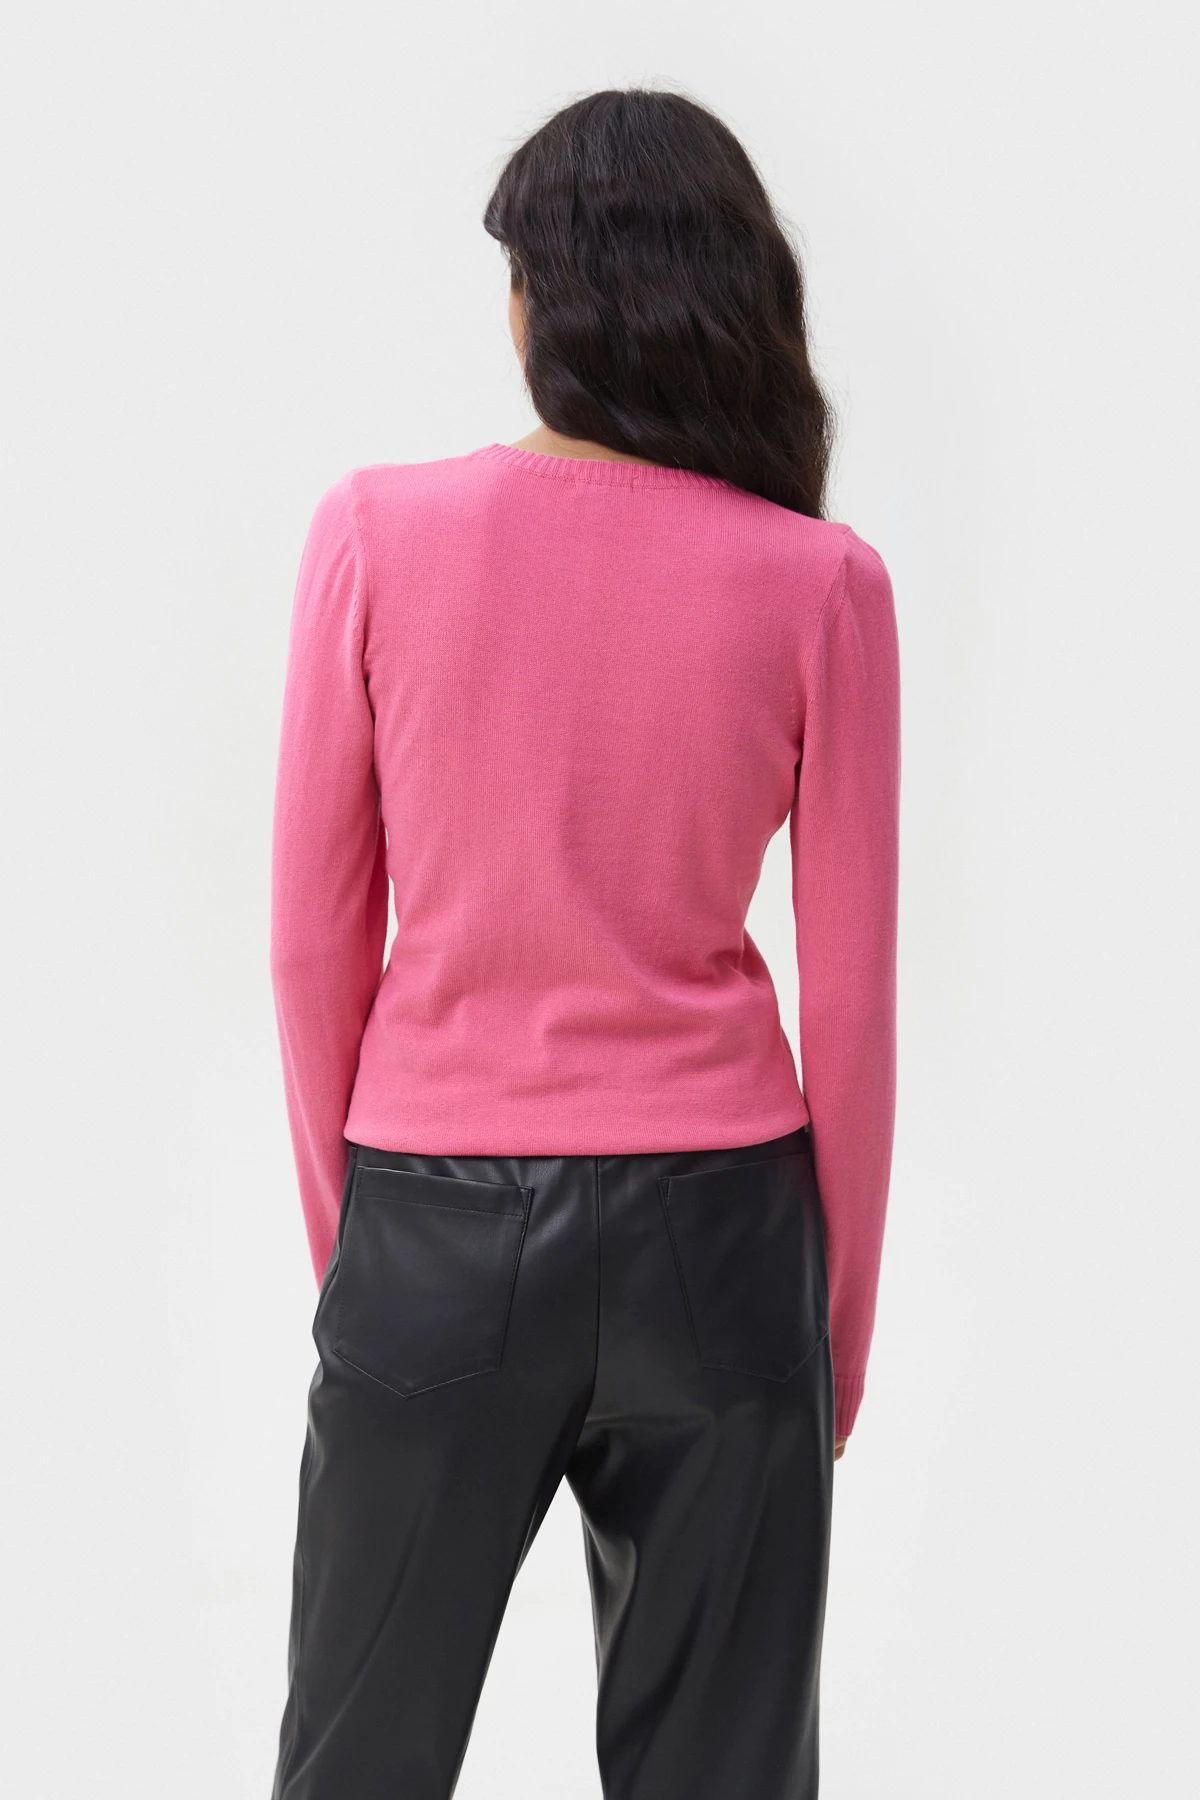 Pink knitted cotton jumper, photo 3